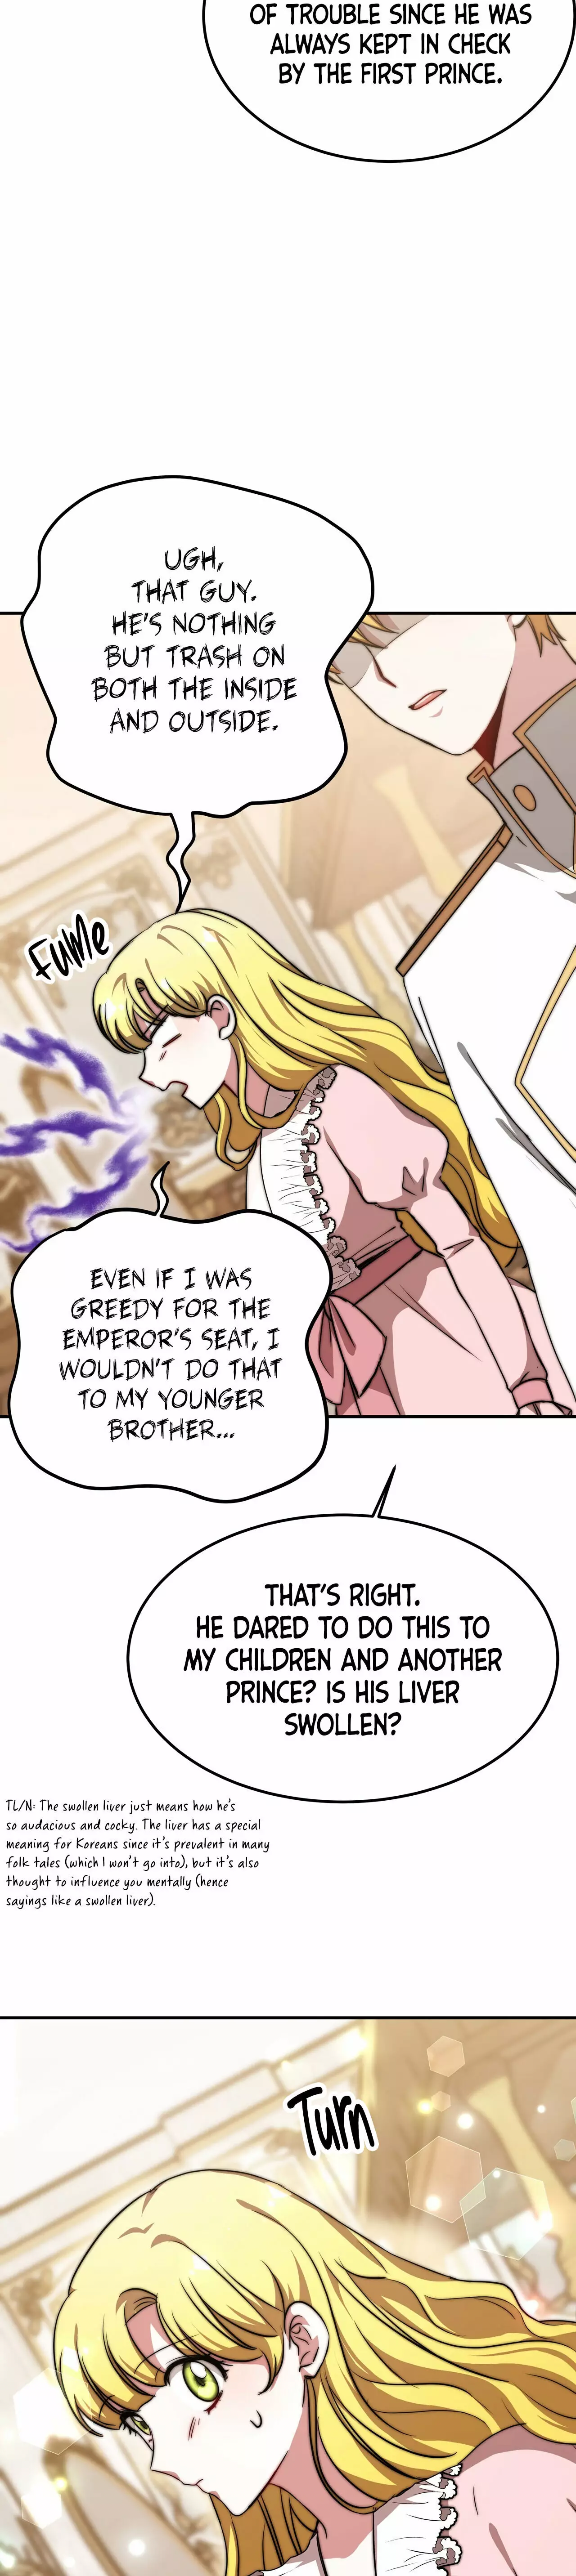 The Forgotten Princess Wants To Live In Peace - 10 page 68